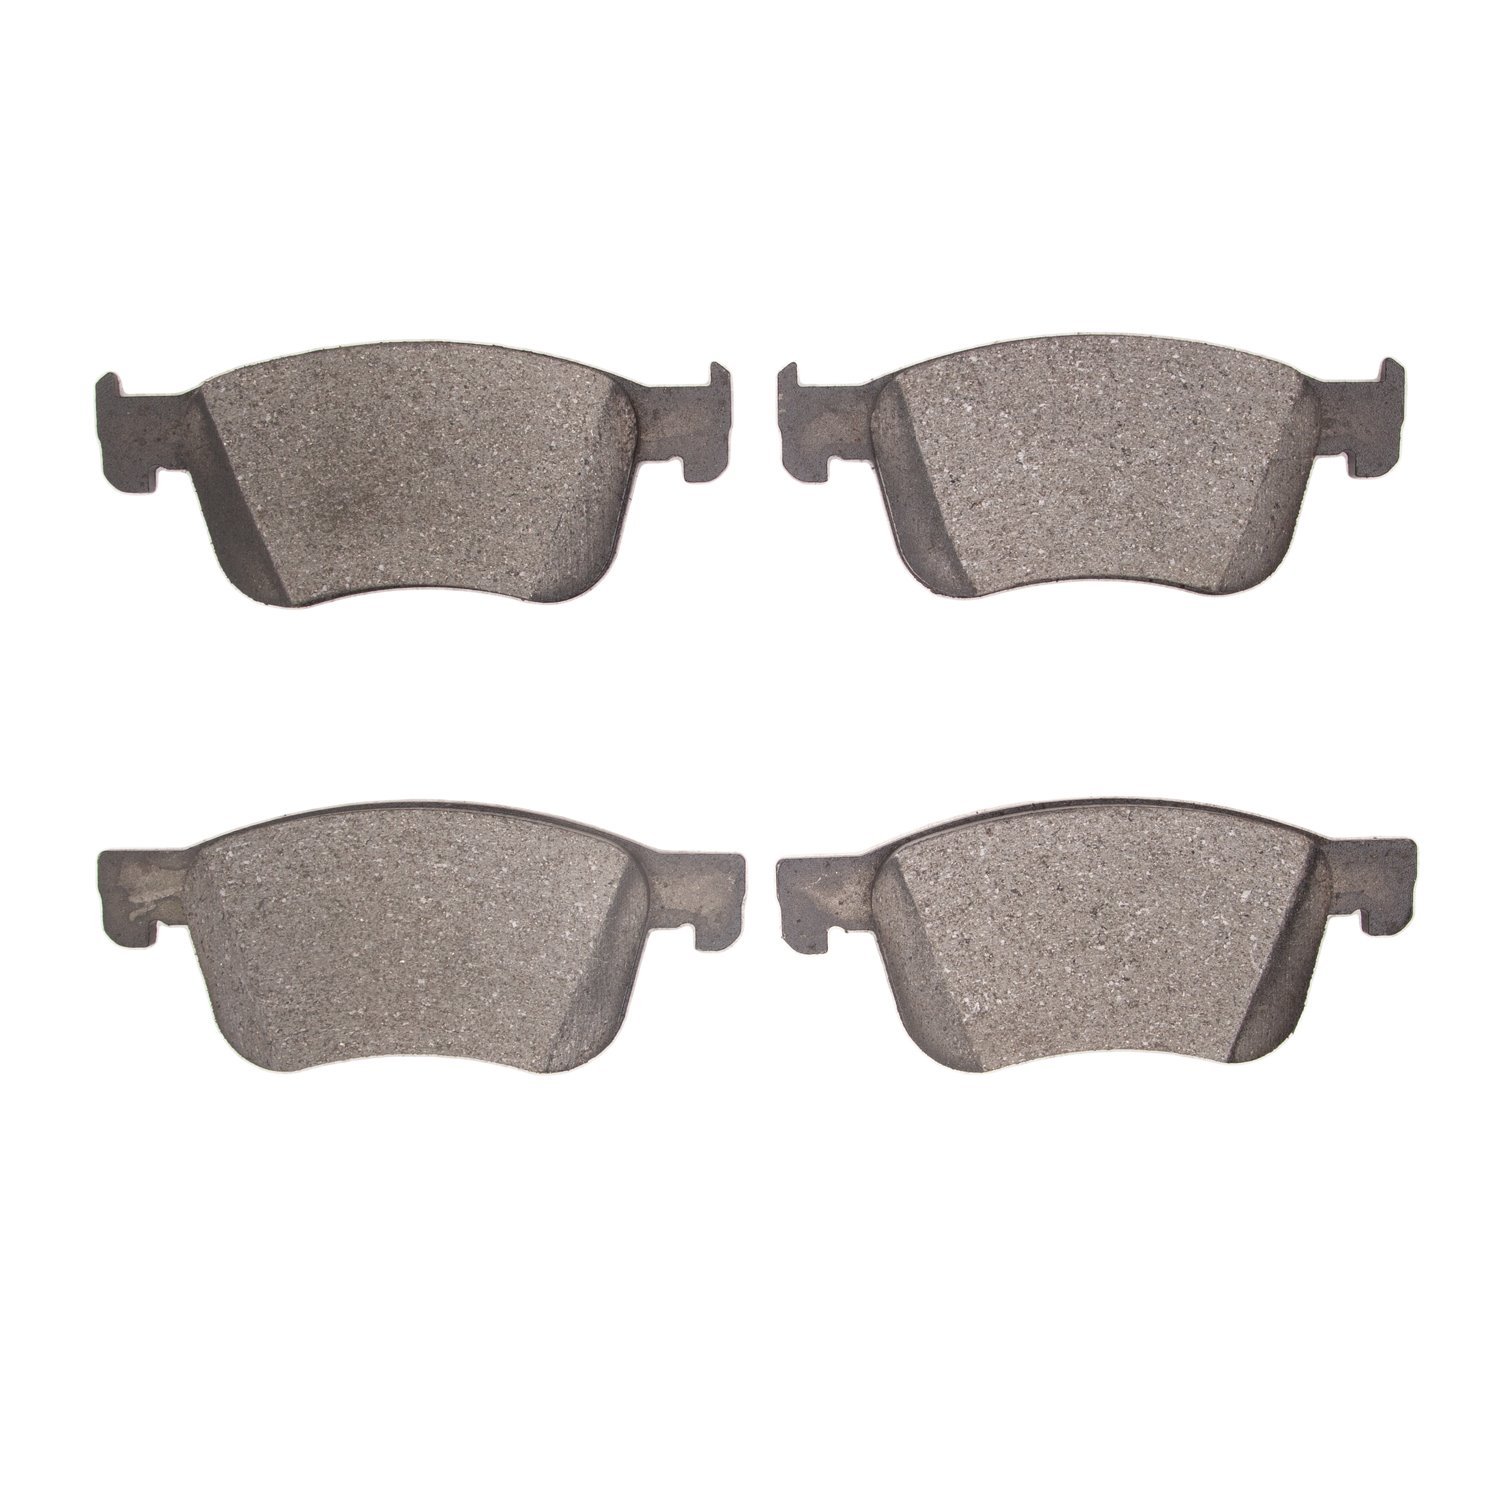 1310-2115-00 3000-Series Ceramic Brake Pads, Fits Select Acura/Honda, Position: Front